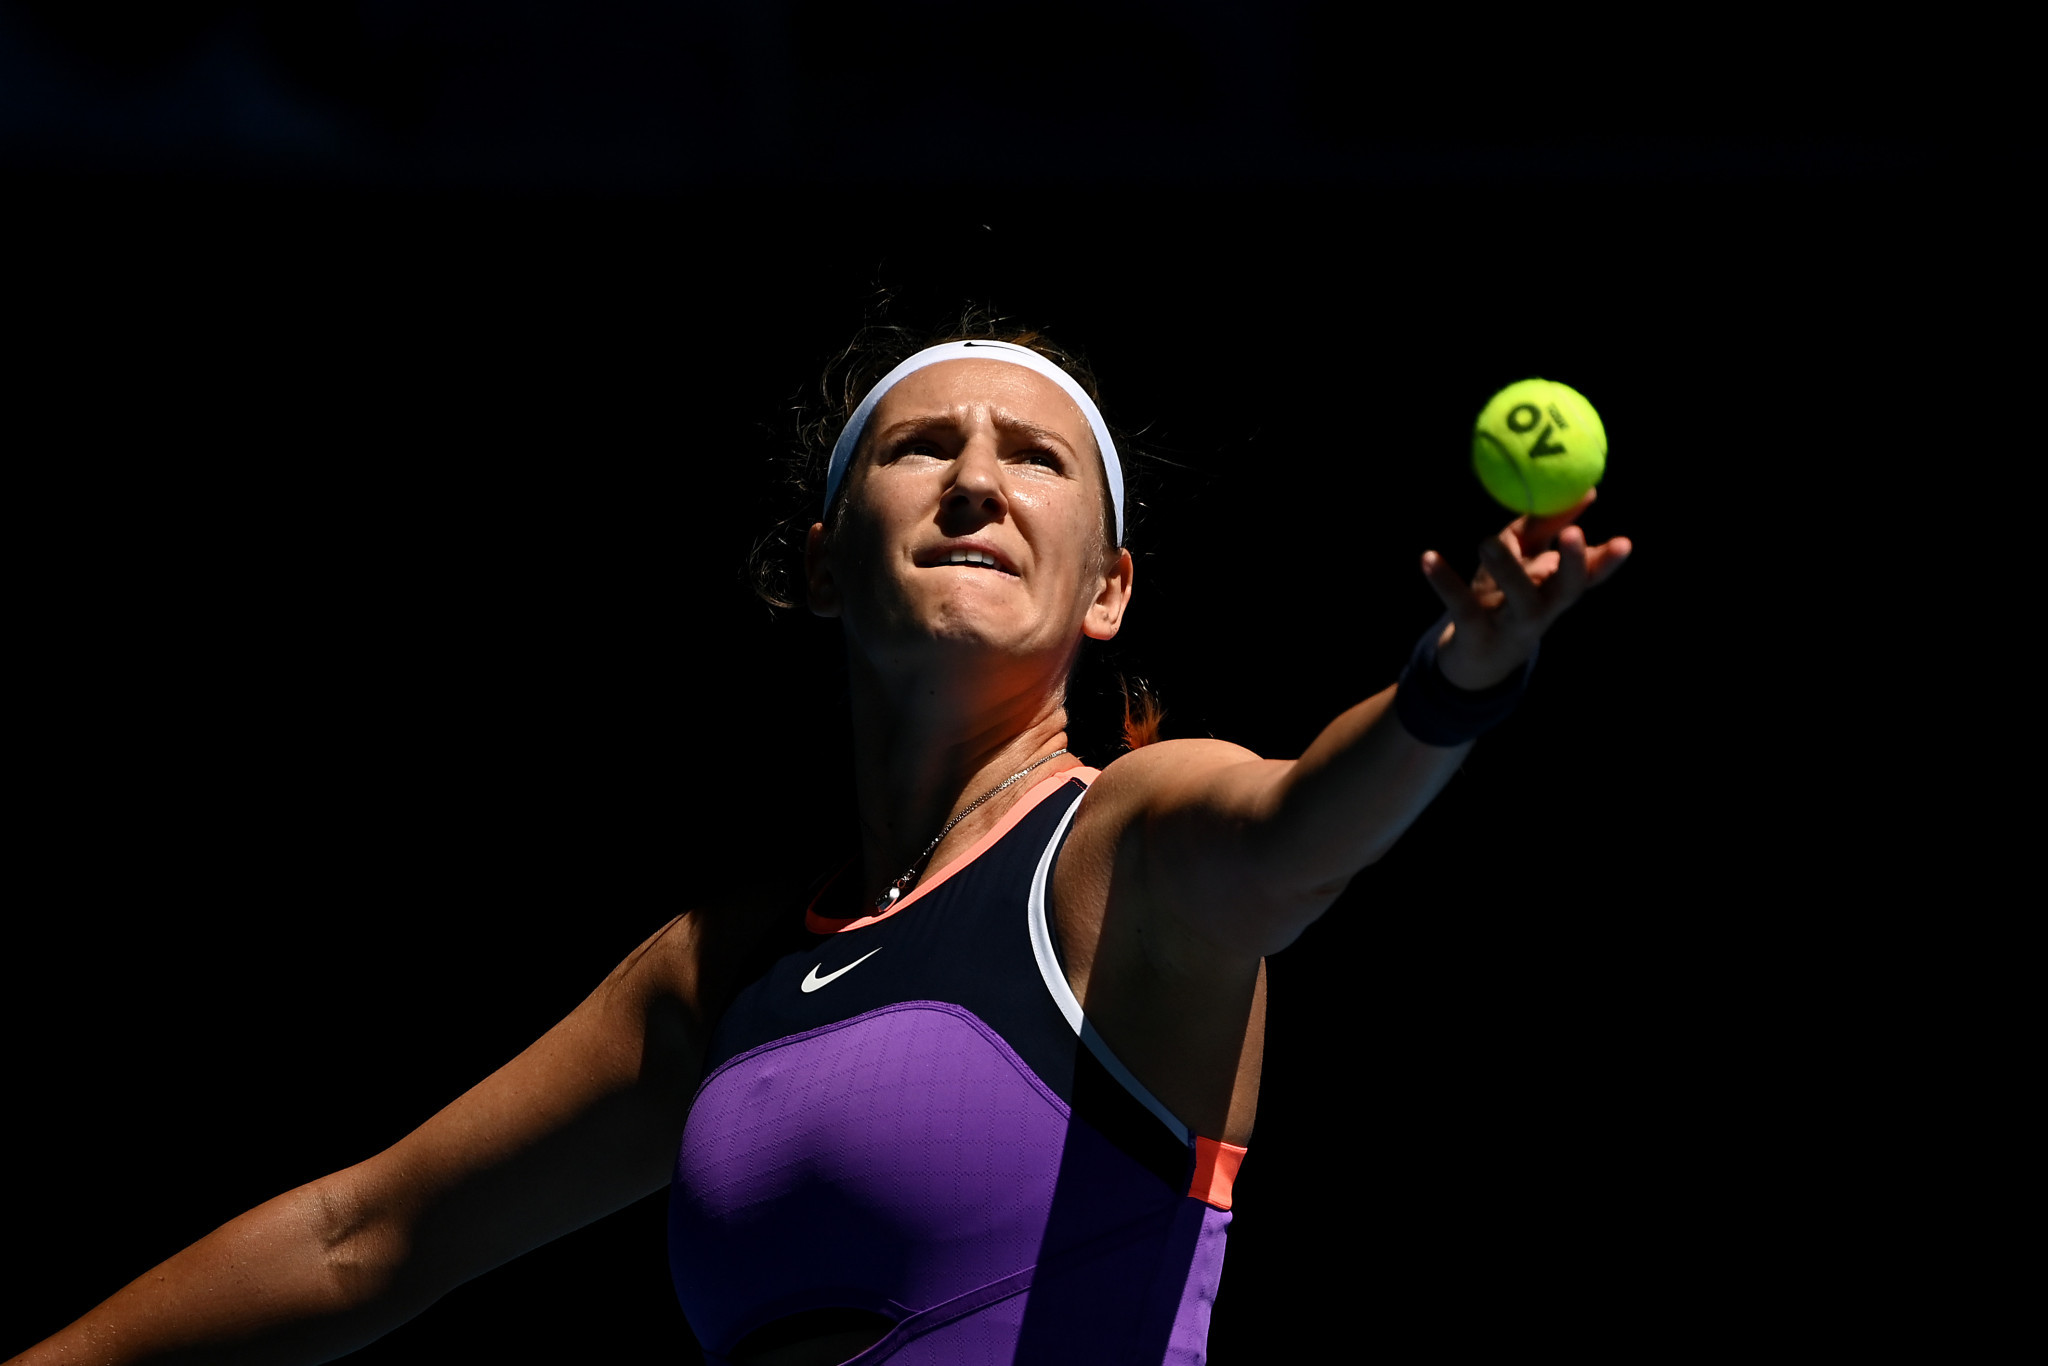 Victoria Azarenka, the 12th seed, suffered a surprise straight sets loss to American Jessica Pegula ©Getty Images